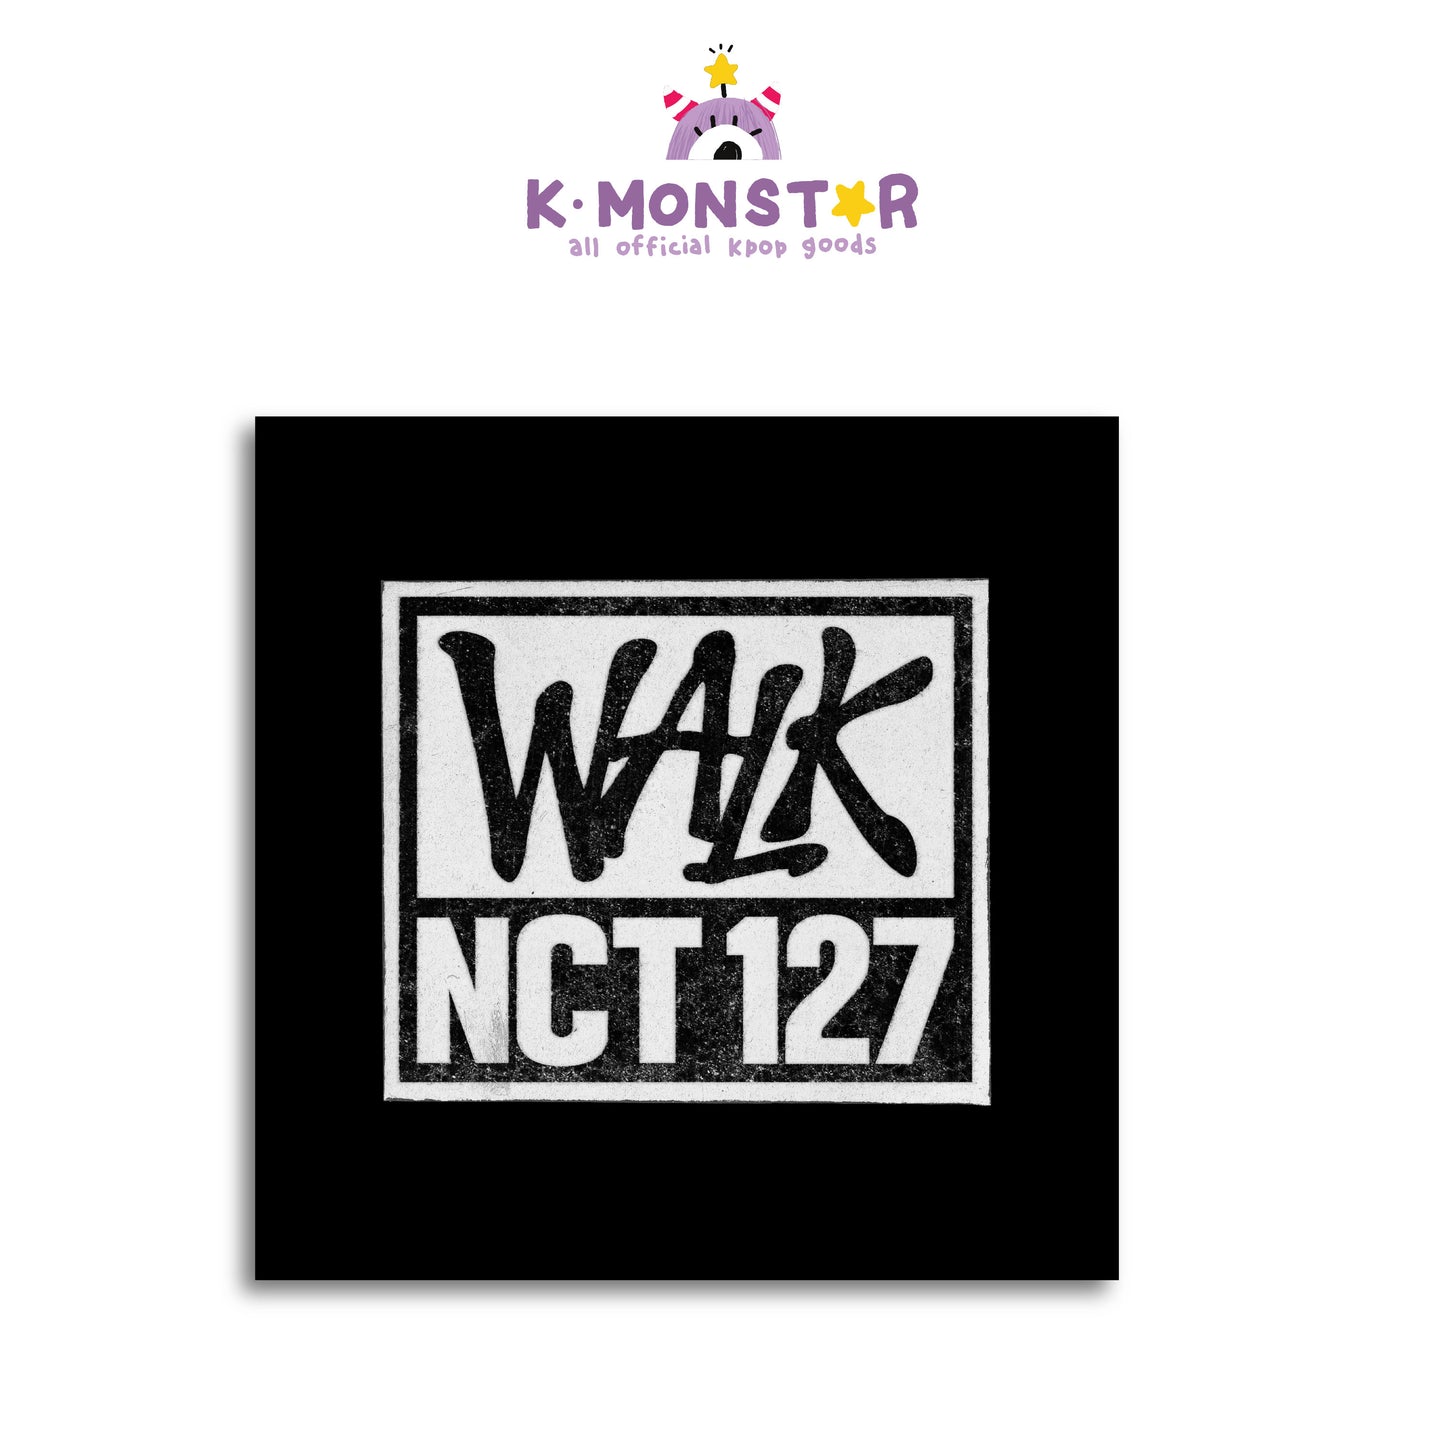 NCT 127 | The 6th Album | WALK (Poster Ver.)